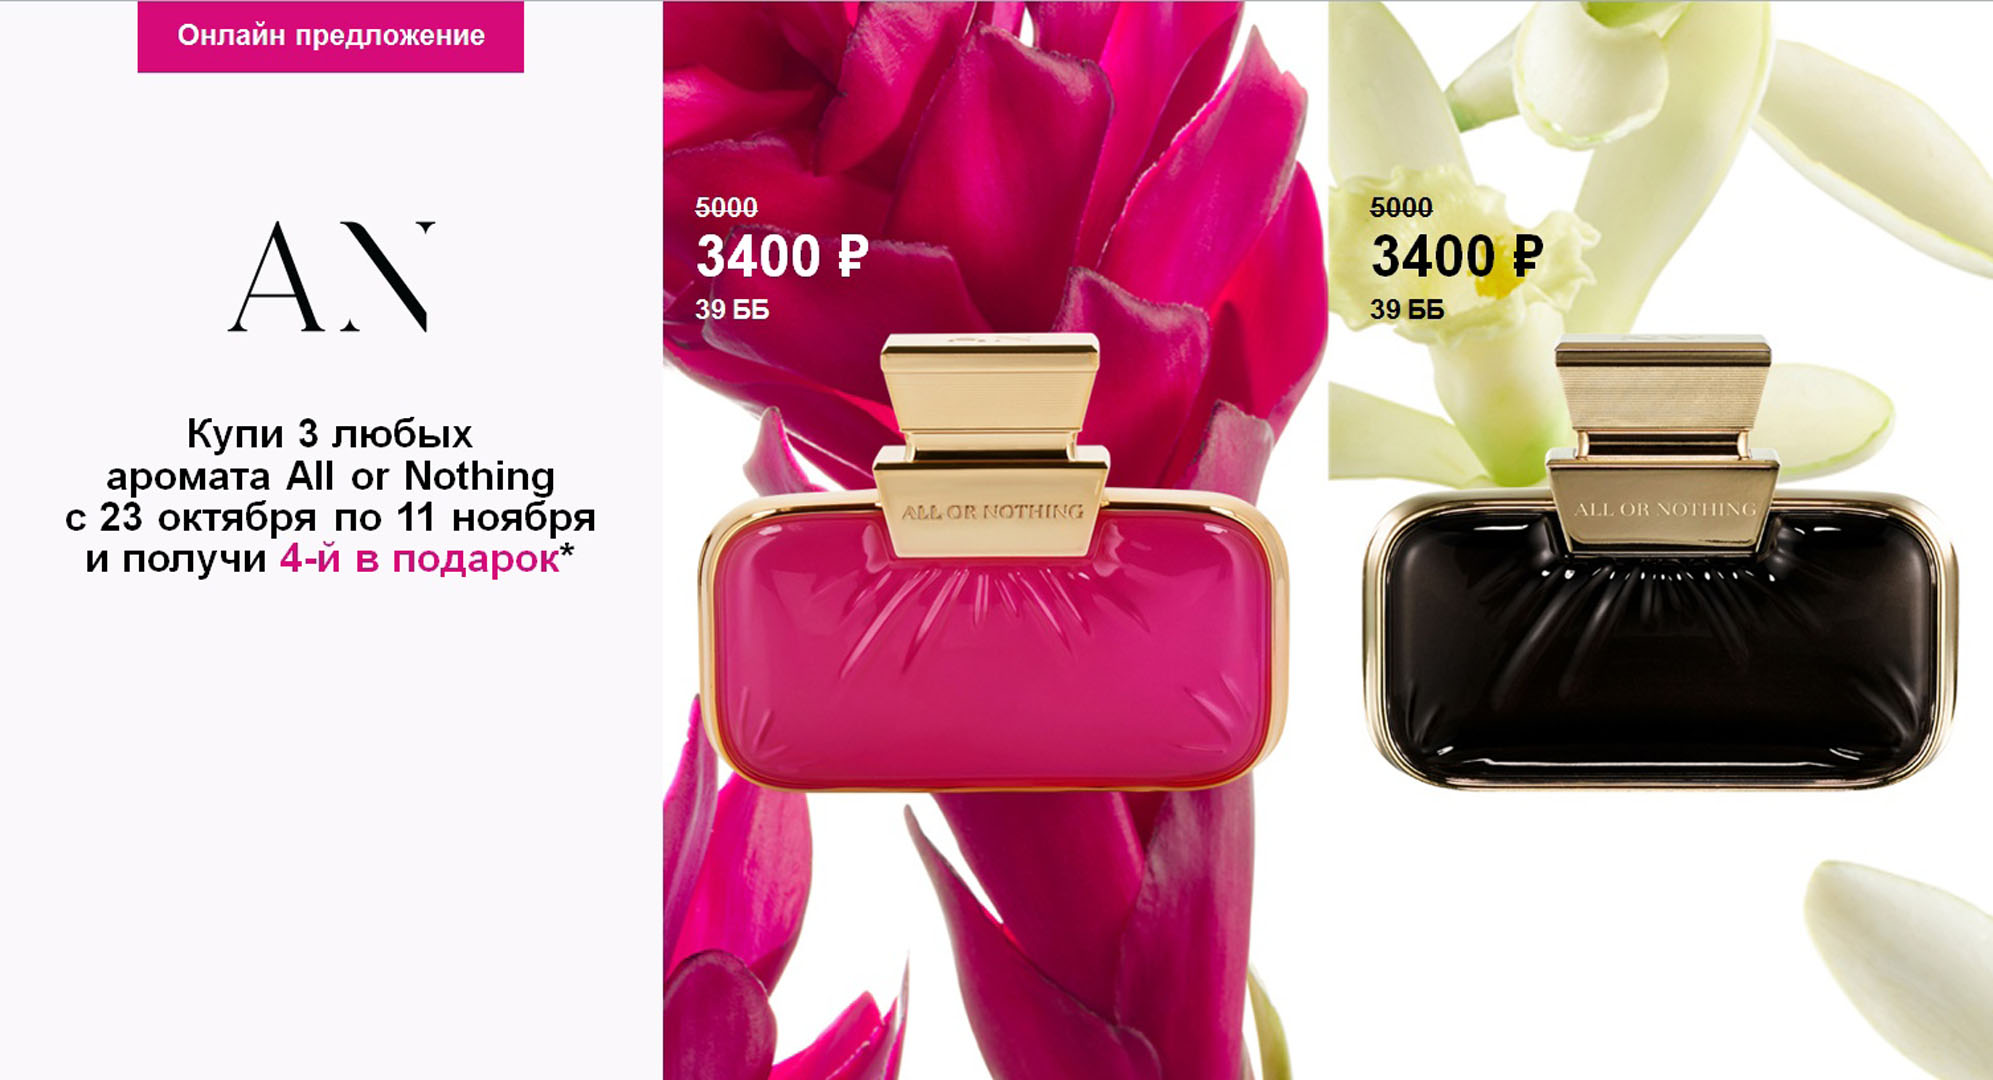 All or Nothing Amplified Parfum (46060)